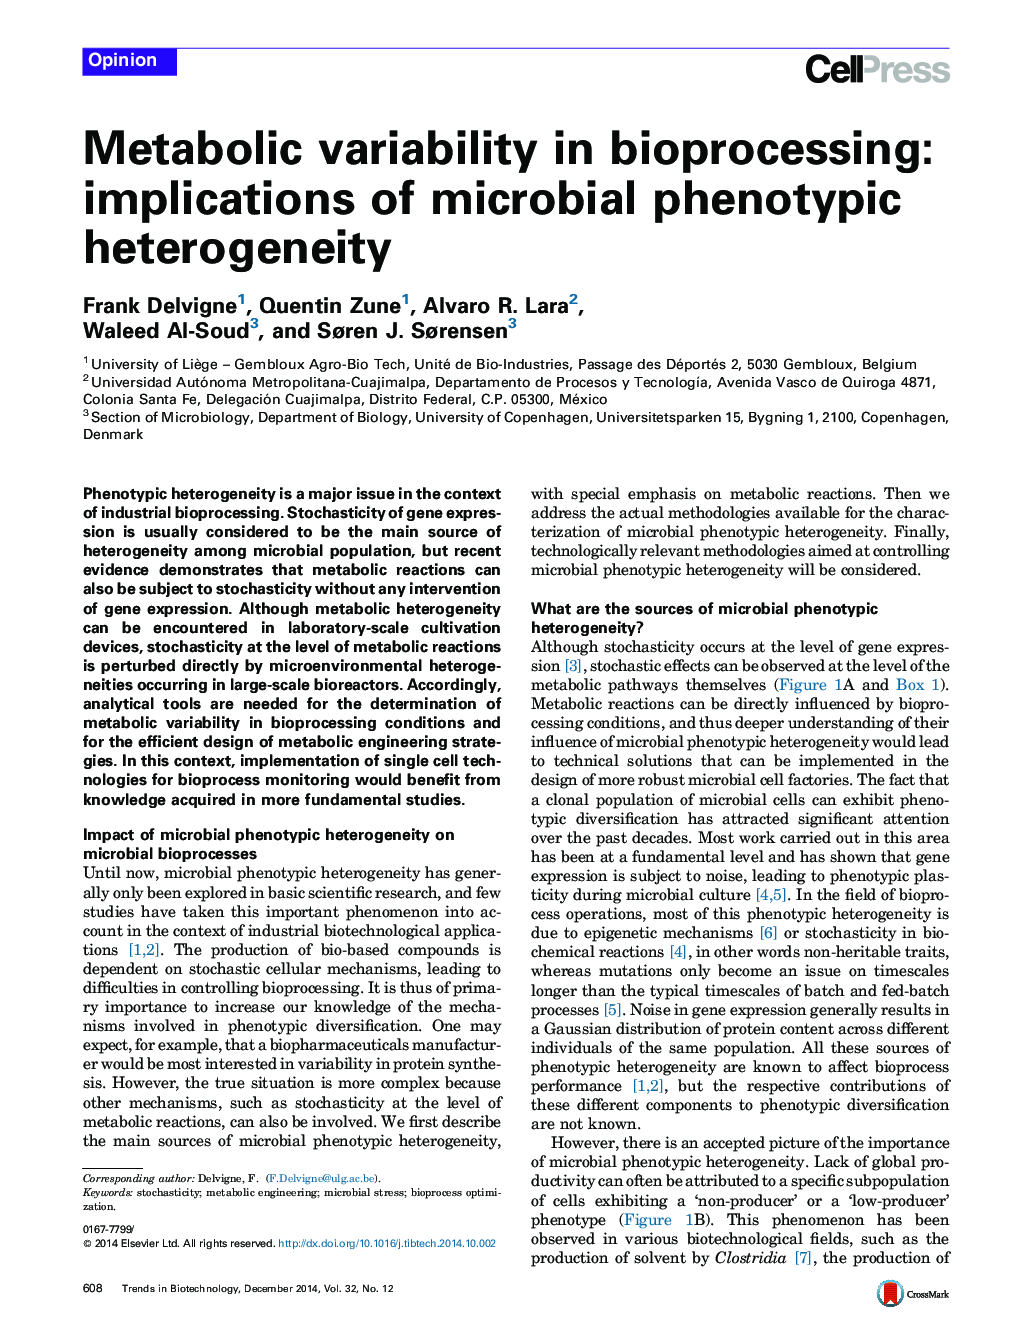 Metabolic variability in bioprocessing: implications of microbial phenotypic heterogeneity